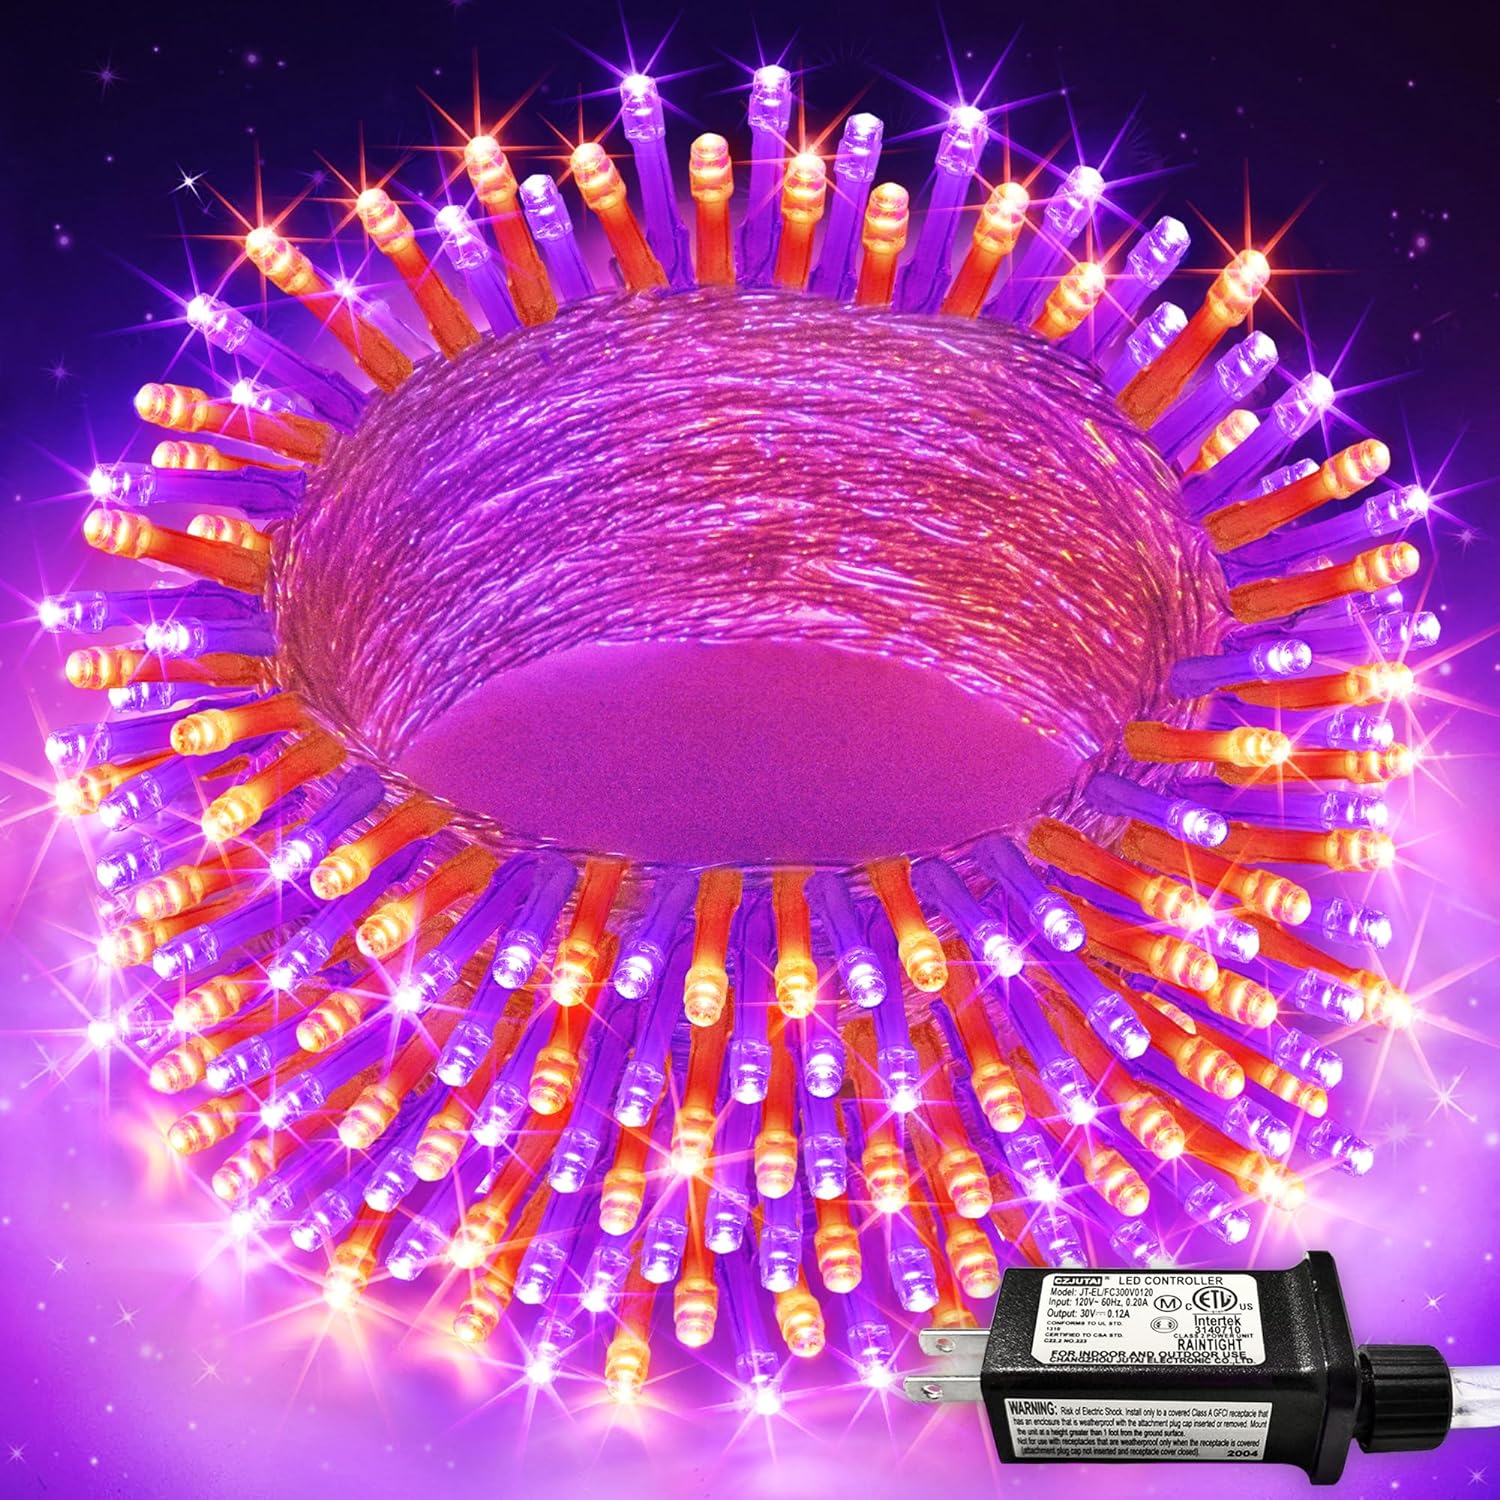 JMEXSUSS 66FT 200 LED Halloween String Lights Outdoor, Orange and Purple Halloween Lights Clear Wire, 8 Modes Waterproof Christmas Twinkle String Lights Plug in for Tree Halloween Decorations